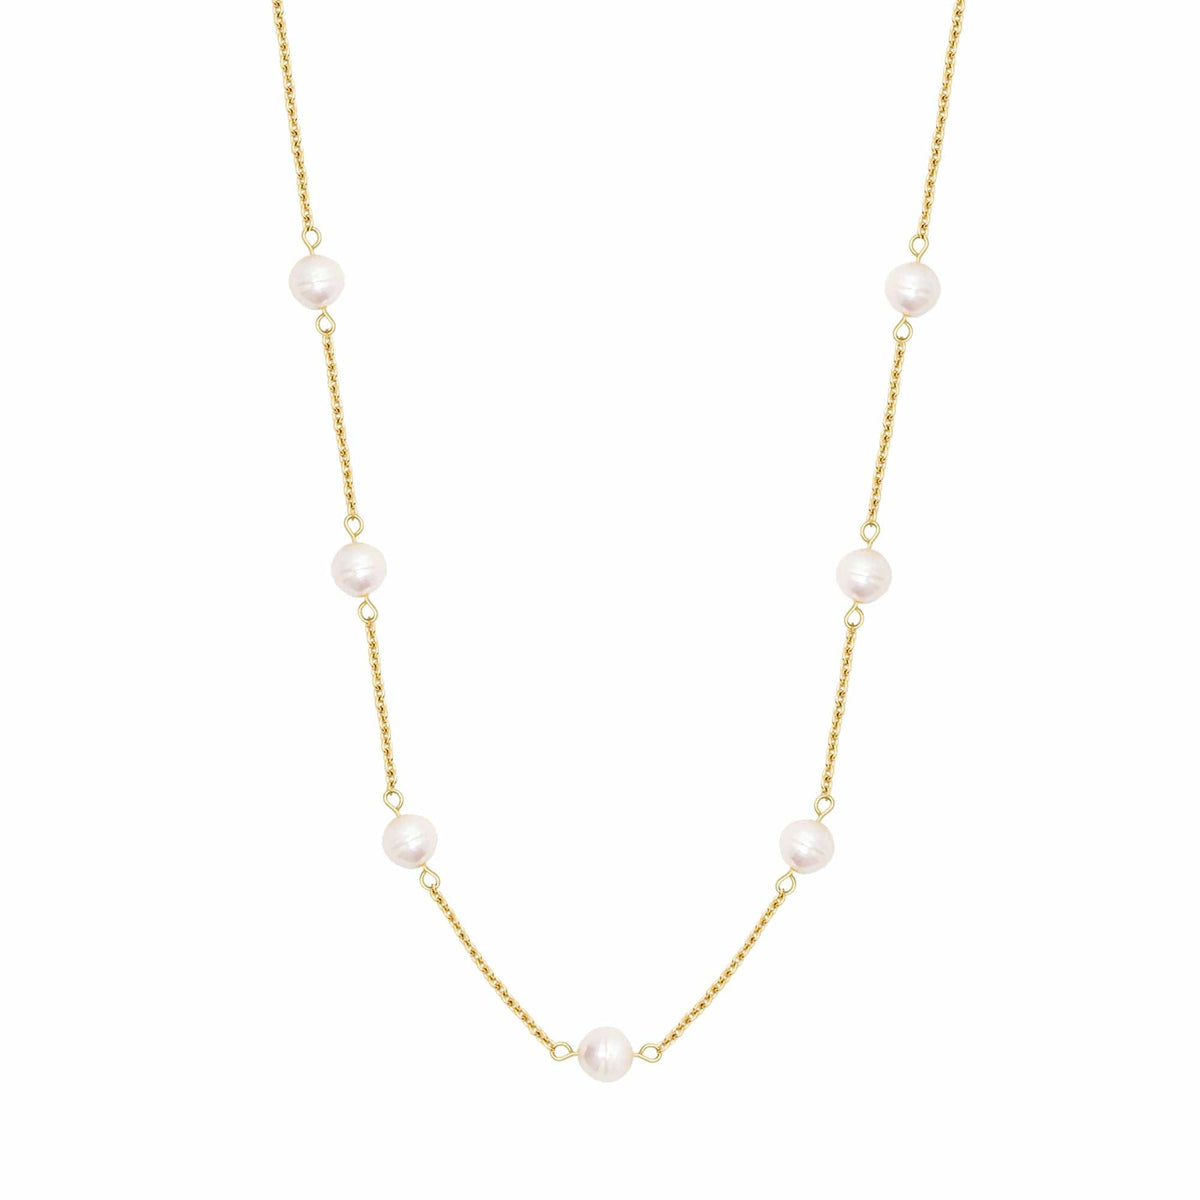 BohoMoon Stainless Steel Charlotte Pearl Necklace Gold